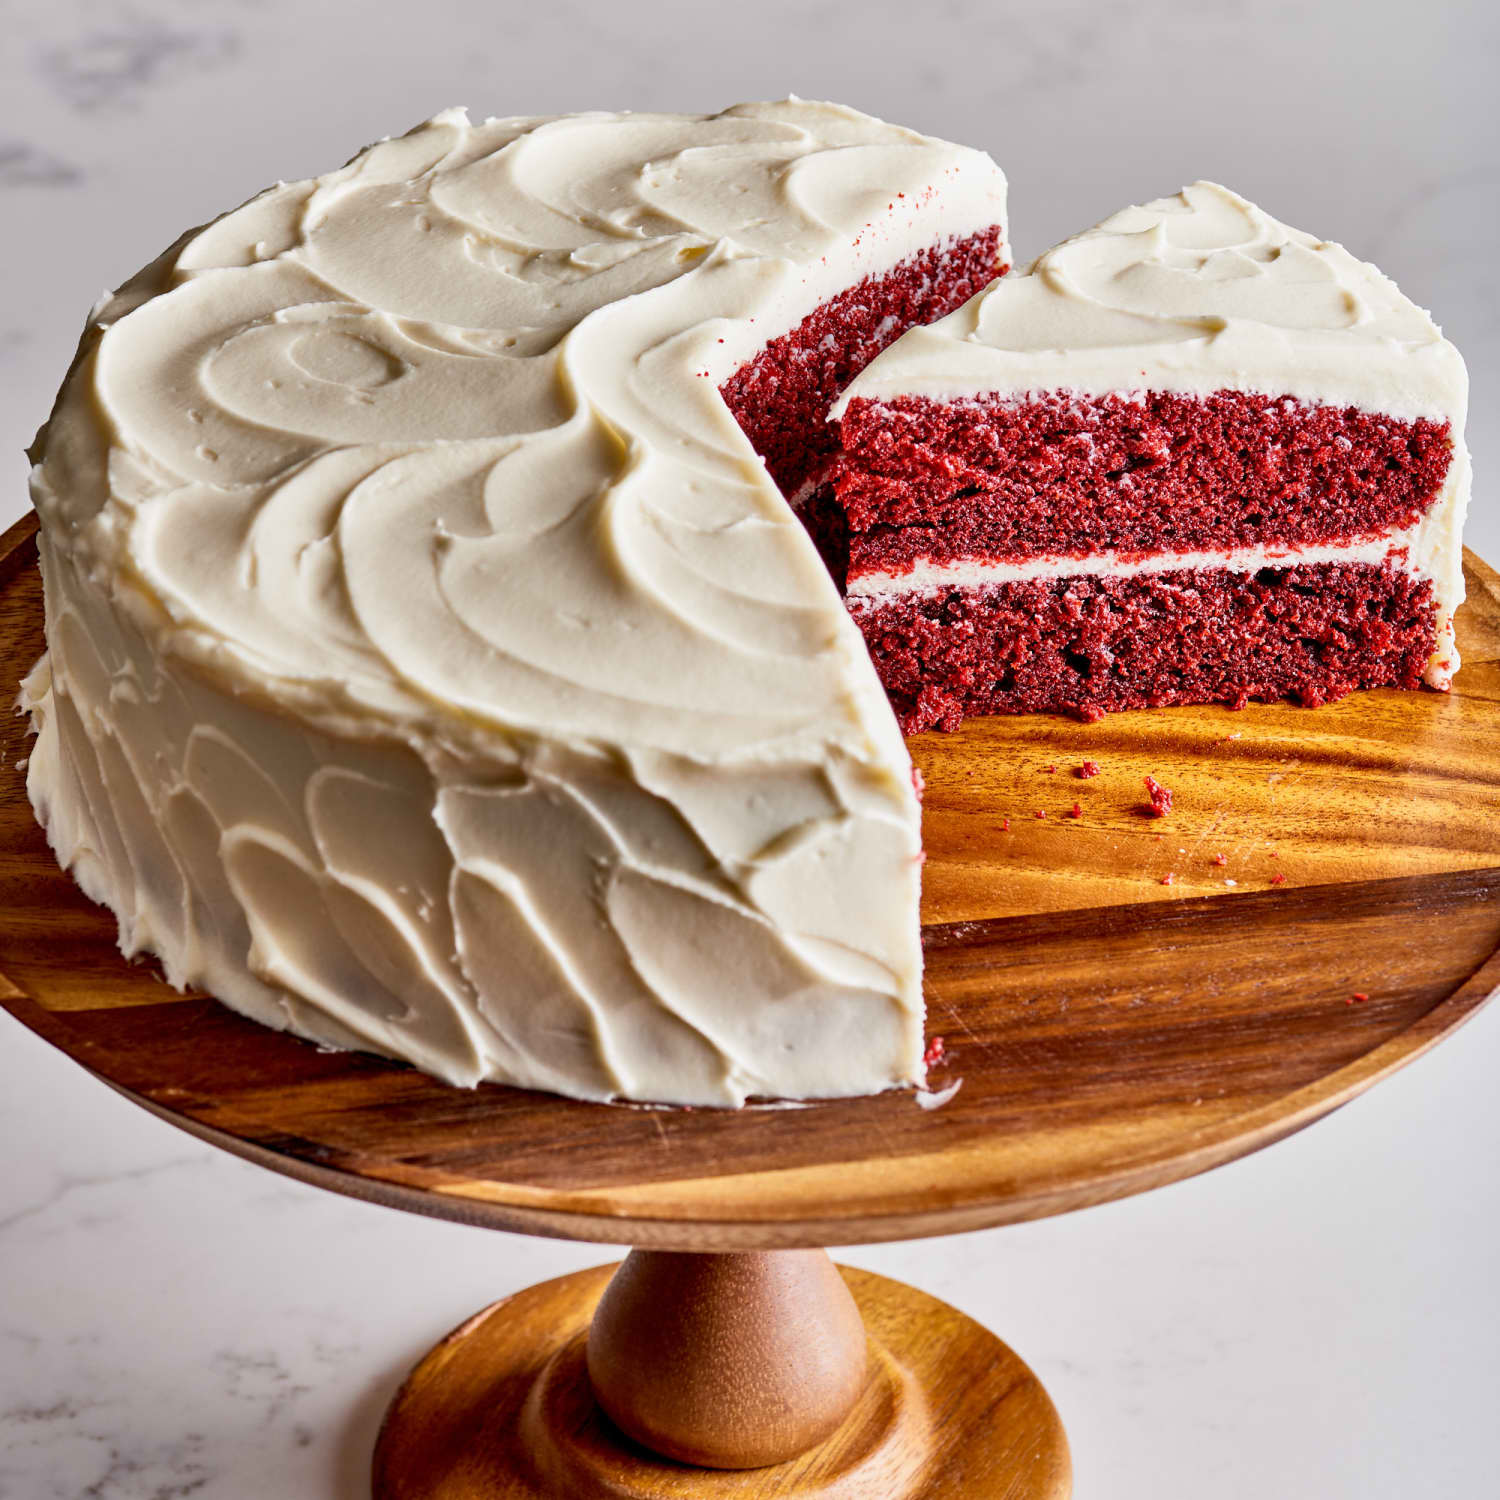 What Is Red Velvet Cake—And Why Is It Red?